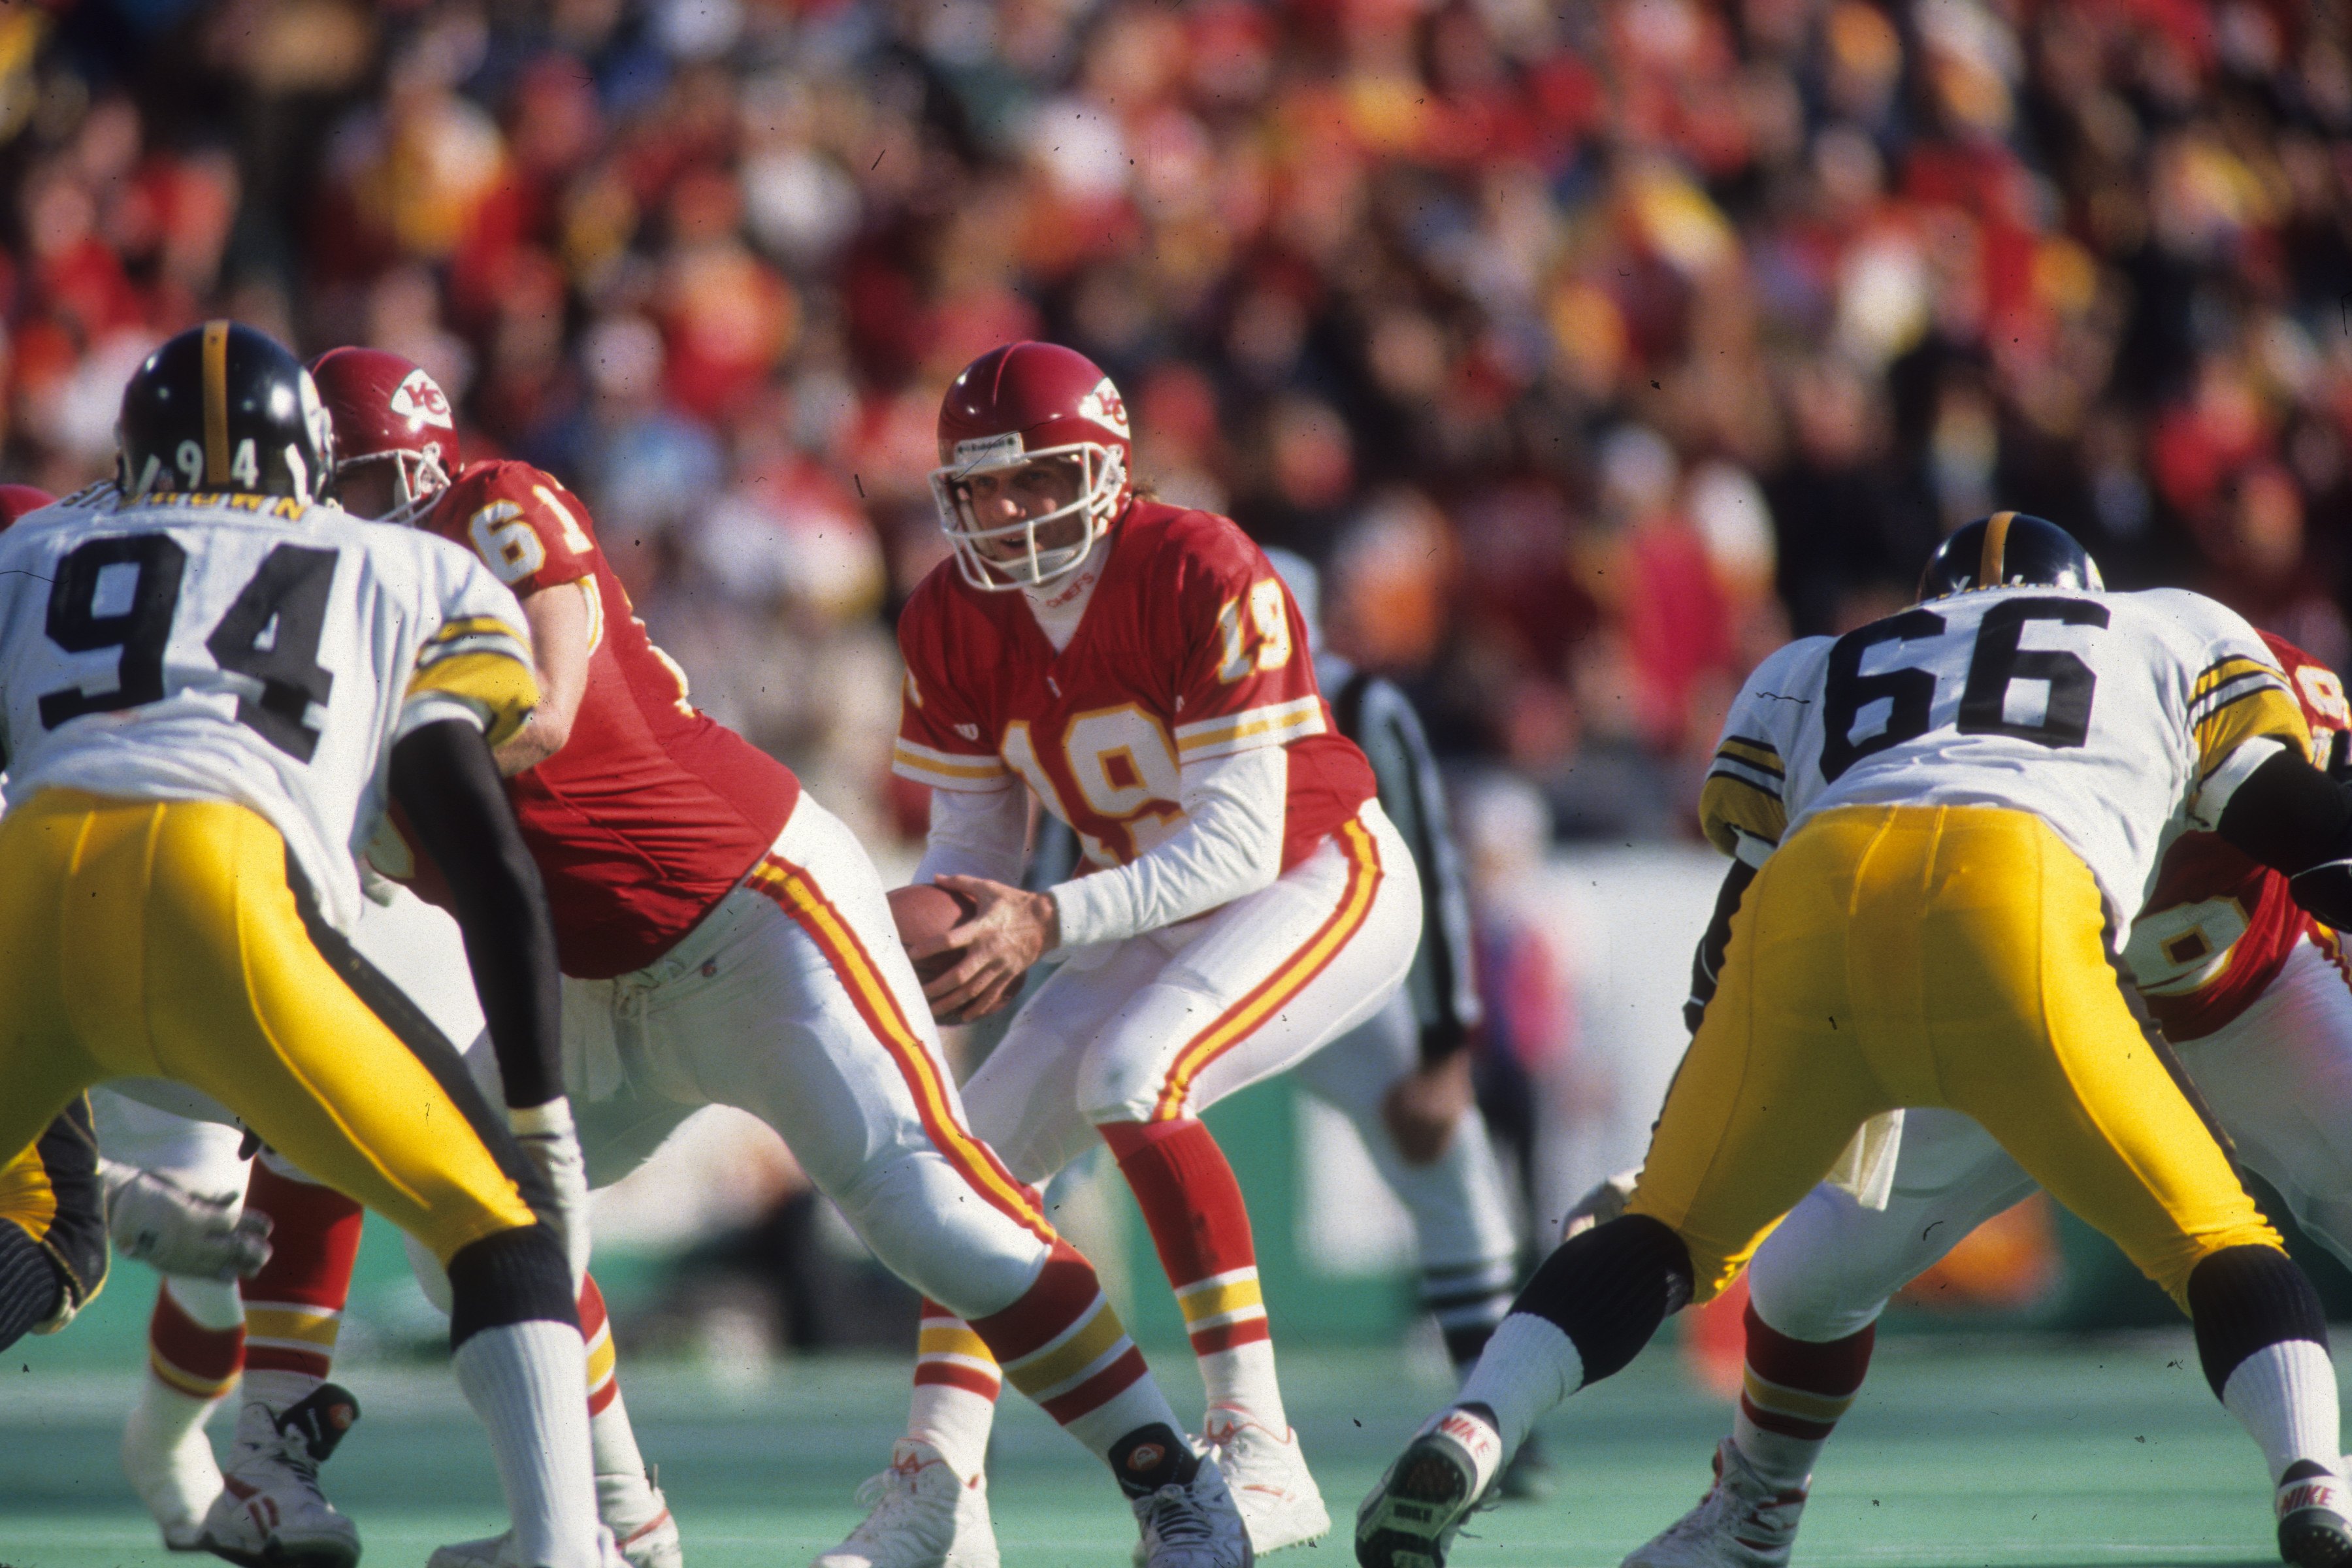 Joe Montana leads the Chiefs past the Steelers in the 1993 AFC Playoffs